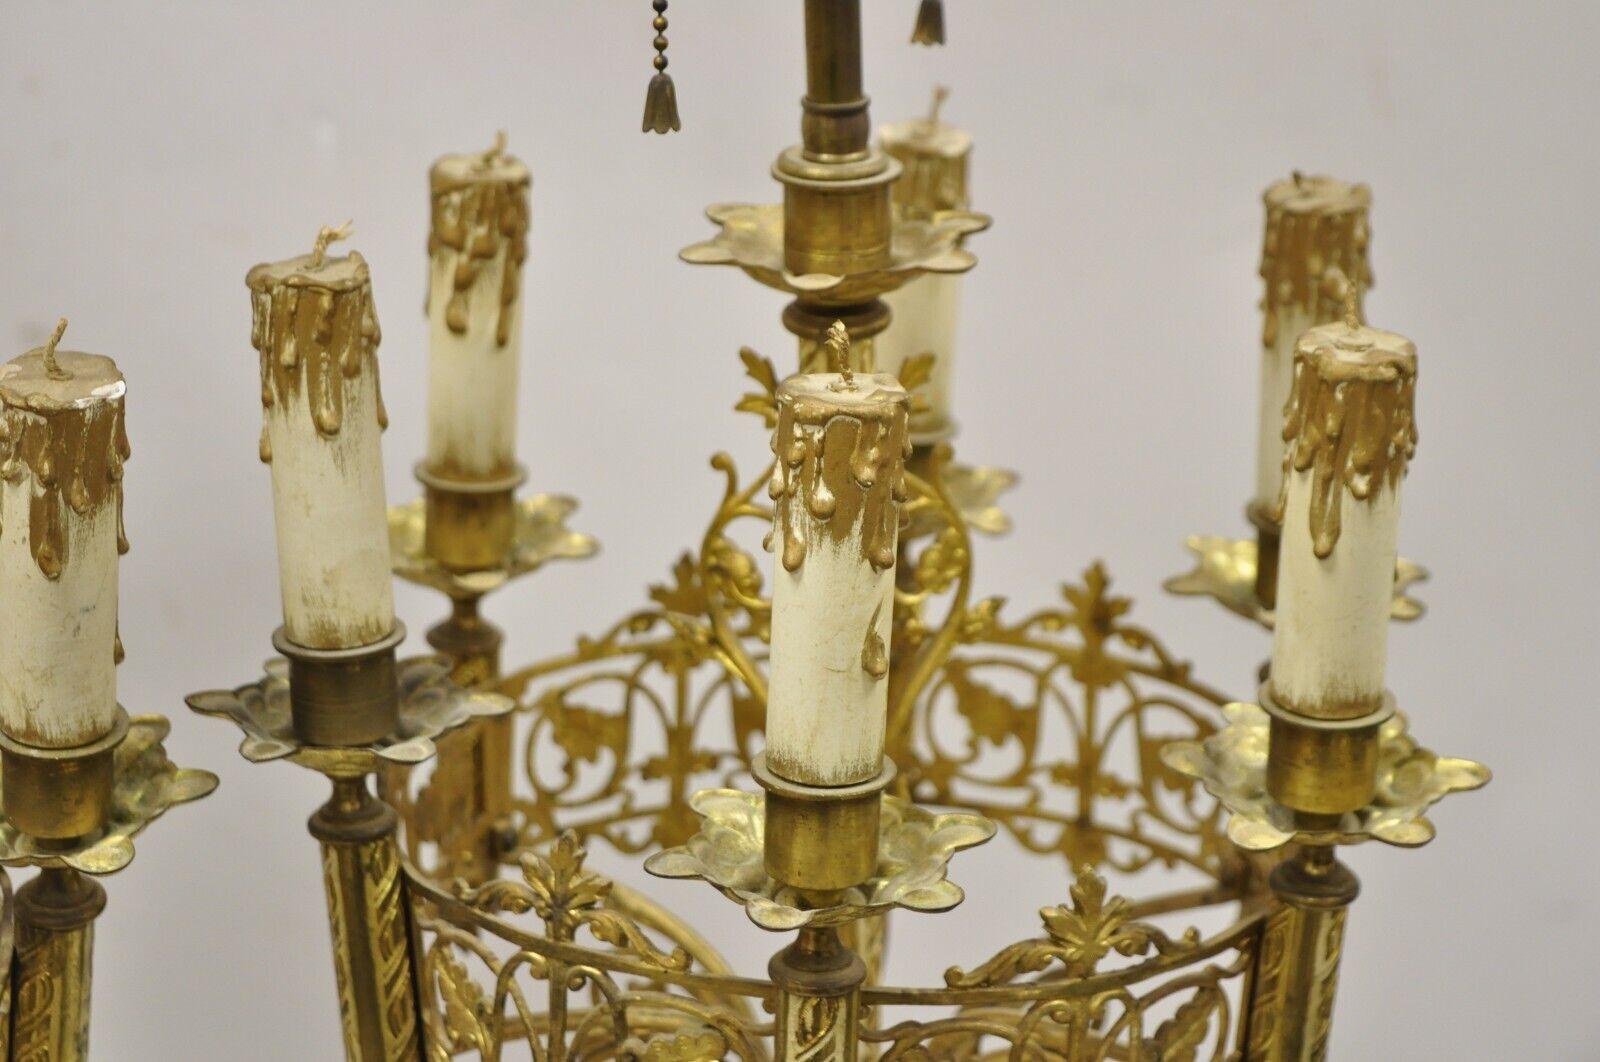 Antique Gothic Revival Gold Bronze Figural Candelabra Table Lamps, a Pair In Good Condition For Sale In Philadelphia, PA